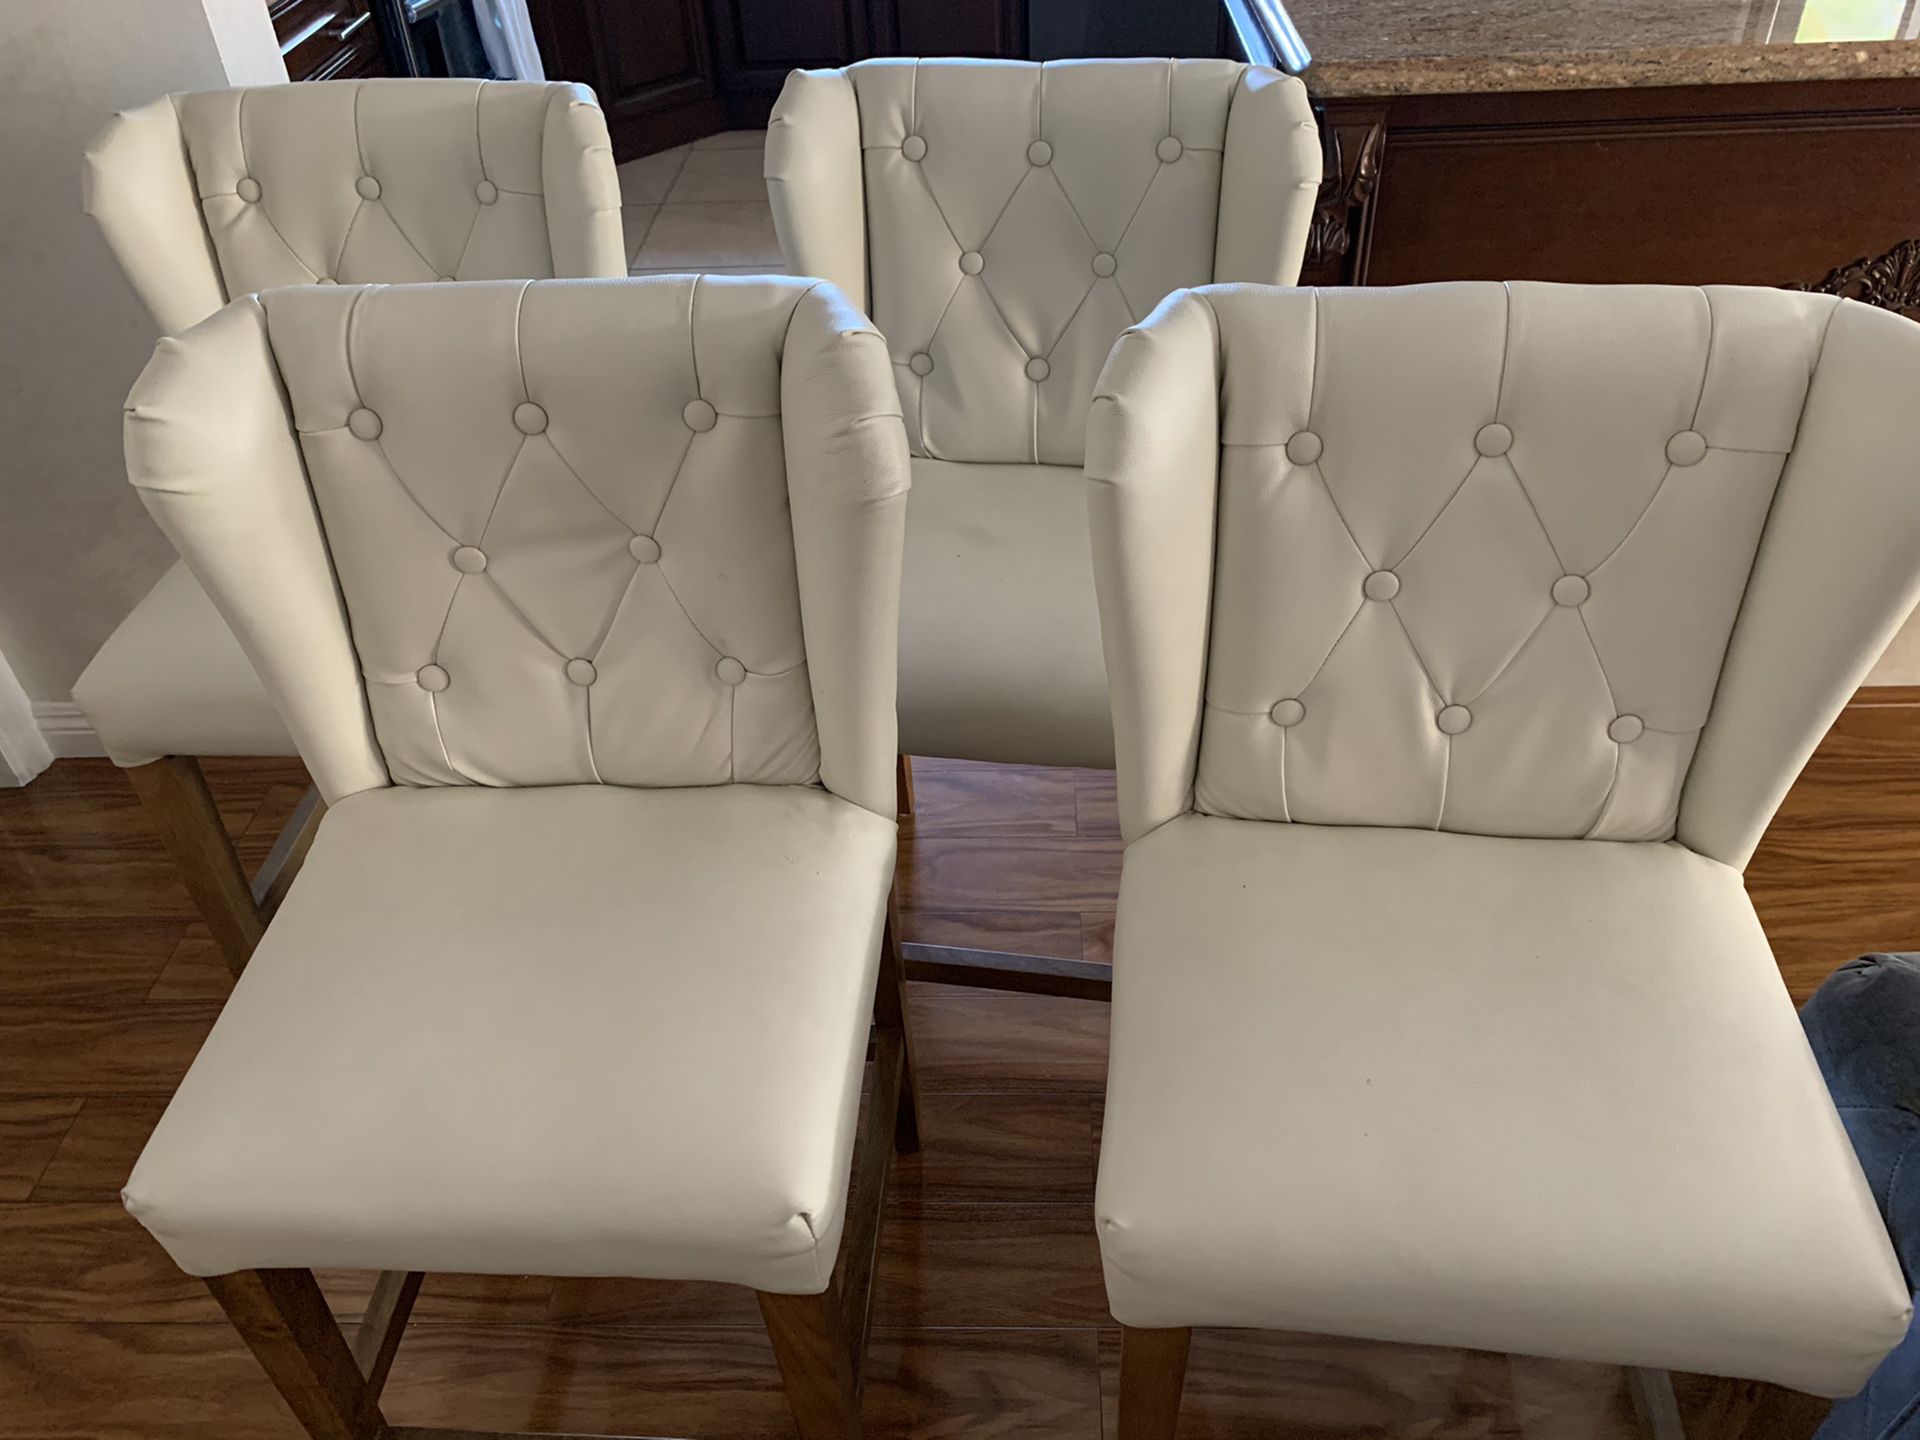 4 Countertop leather chairs 24 “ Seat Hight